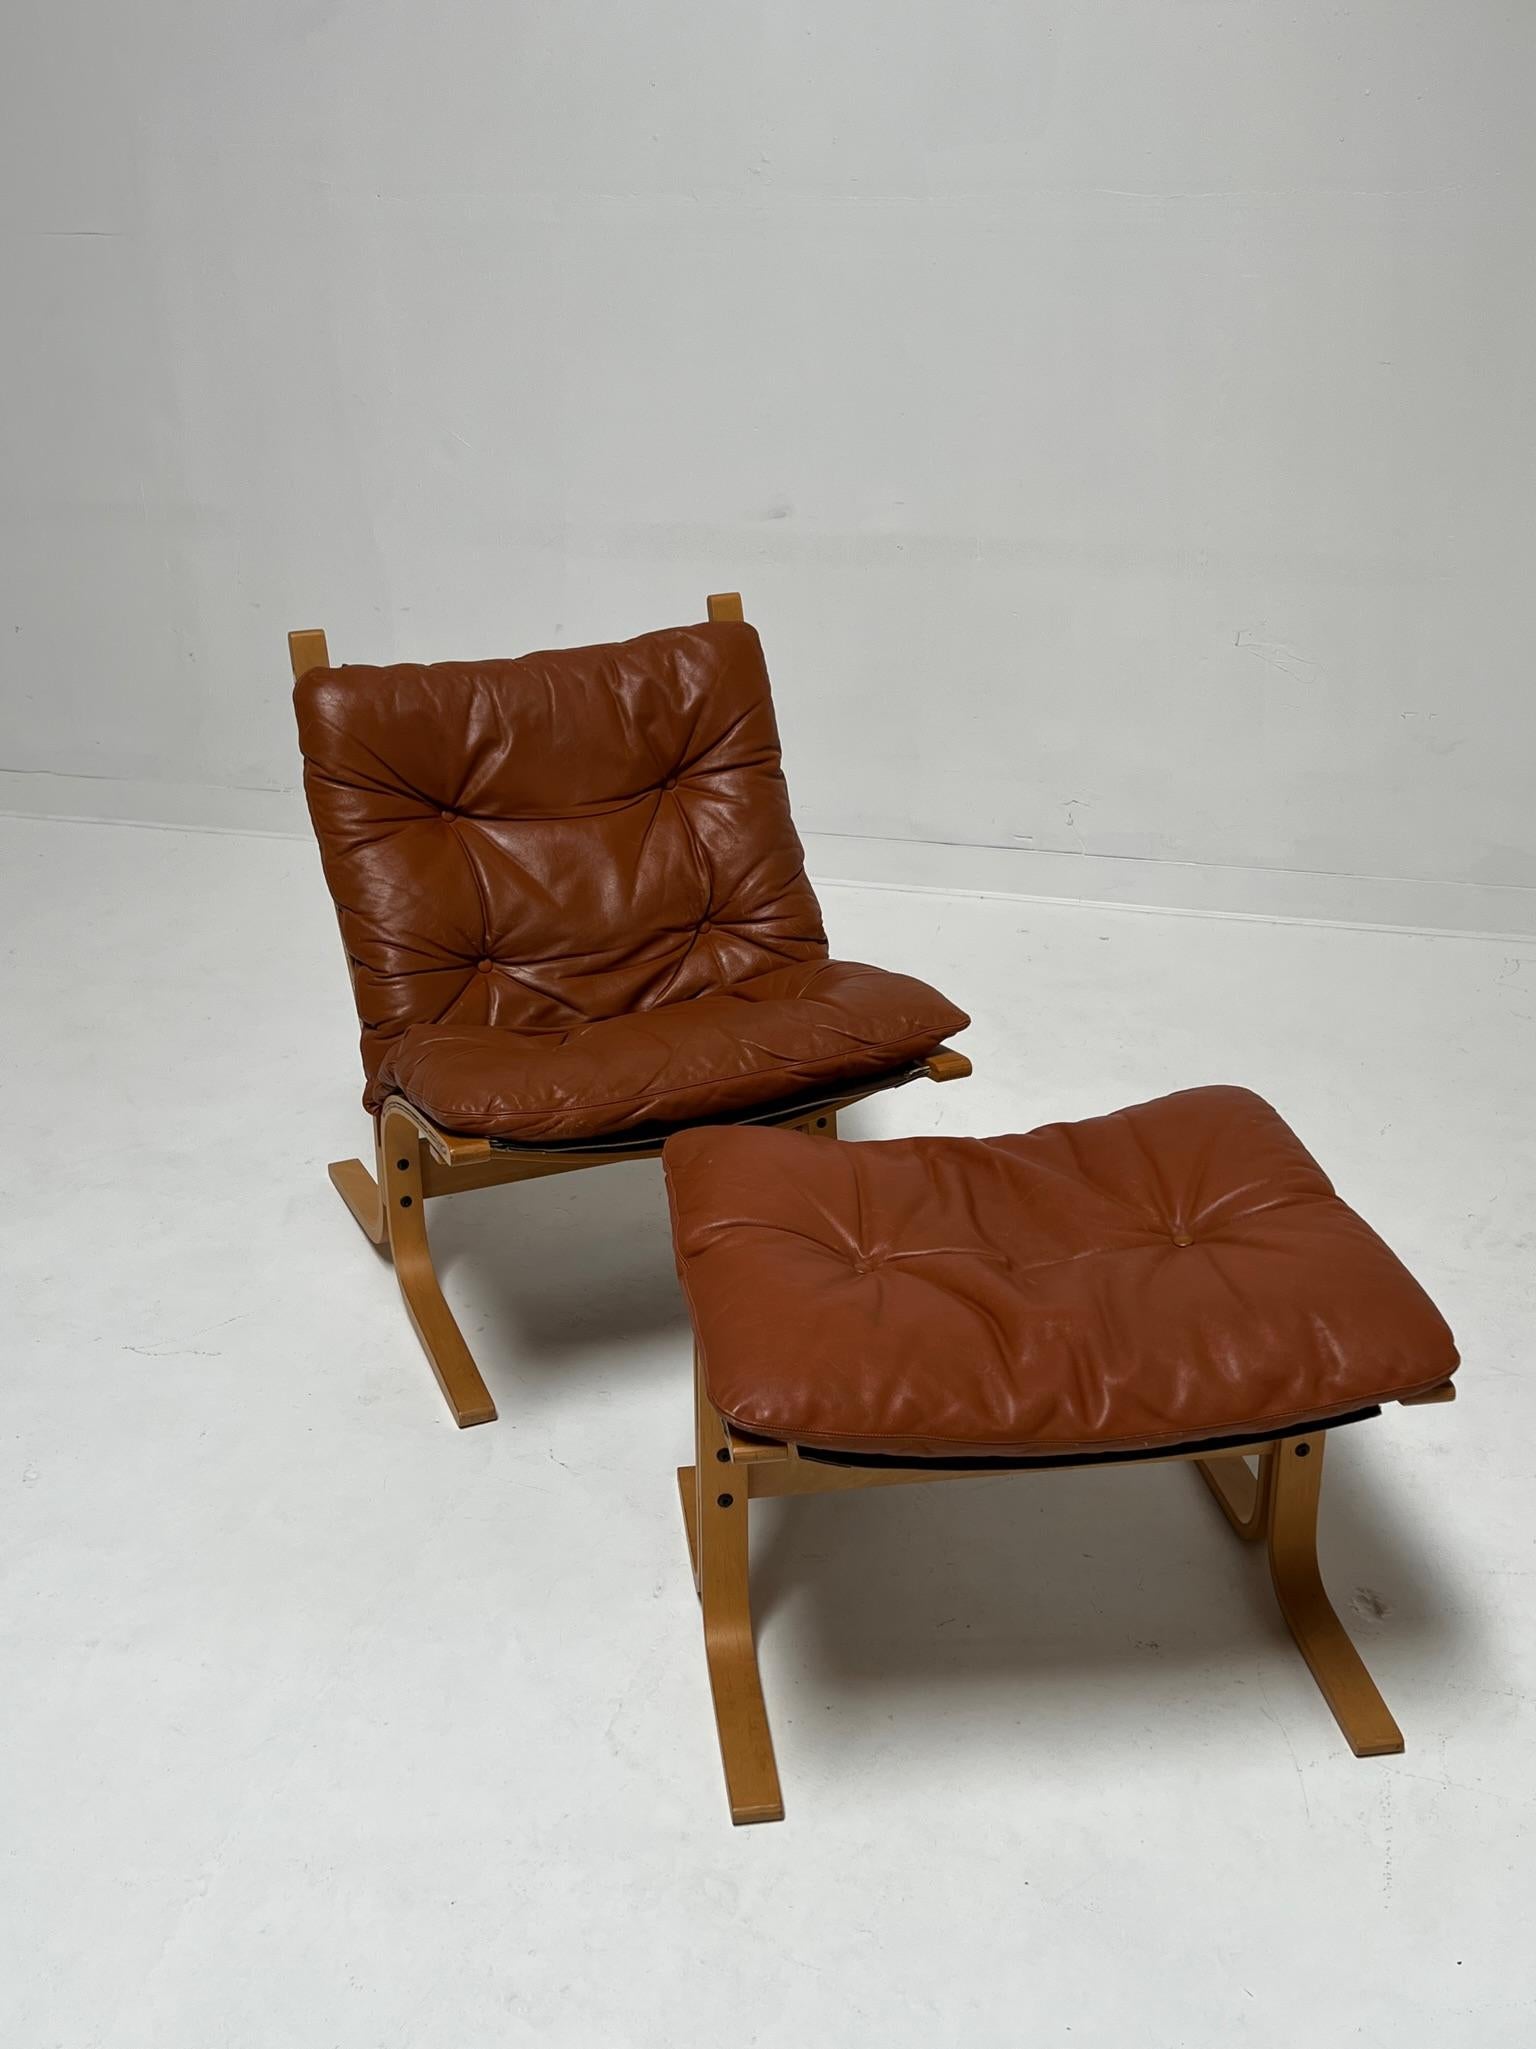 Siesta sling chair by iconic Norwegian designer Ingmar Relling. Manufactured in the late 1960s by Westnofa. This chair has been prized for its comfort, style and efficient use of materials. 

Overall good condition with nice patina and appropriate